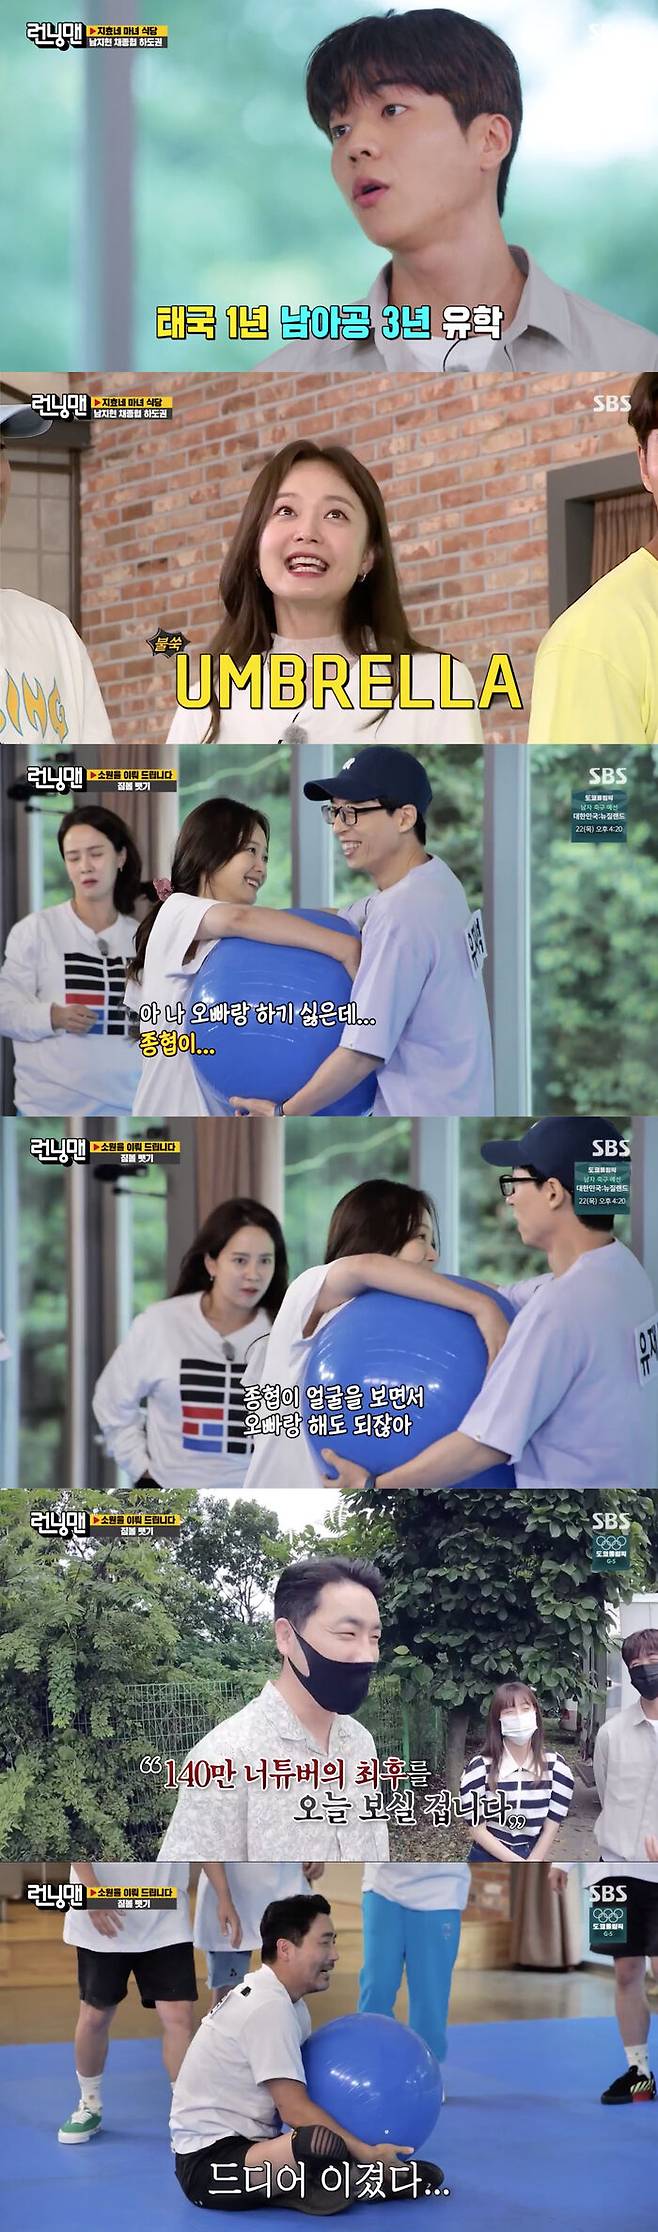 Love frog Jeon So-min reveals self-interest in Rapeseed orOn SBS Running Man broadcasted on the 18th, I will make a small one race with the actors of the drama Come to the Witch Restaurant.On this day, Nam Ji-hyun, Rapeeseed or Ha Do-kwon appeared as a guest with the invitation of Song Ji-hyo.And the new actor Rapeeseed or caught the eye with a nervous look at the unfamiliar entertainment.Yoo Jae-Suk revealed his unique history that Rapeseed or studied abroad in South African wine. Rapeseed or said, It was a while ago.I lived in Thailand for one year and South African wine for three years. After hearing that Rapeseed or was a fluent English speaker, Jeon So-min appealed to memorizing the Umbrella English word without any hesitation.Yoo Jae-Suk, who watched this, said, Somin is with me these days, and his heart is rattling when he opens his mouth.And Jeon So-min showed interest, sparkling at the story of Rapeseed or that he had modelled for South African wine.He also revealed his self-interest that he wanted to do a Zimball-loss mission with Rapeseed or, and made his brothers One.Jeon So-min, who eventually faced Yoo Jae-Suk, played with a fixed eye on Rapeseed or and caused a laugh.On that day, Ha Do-kwon burned his will to succeed in revenge on Kim Jong-kook, saying, Today, the energy of the universe is on me. He collapses today.I will see the end of 1.4 million YouTubers today. And that was his heartfelt: Ha Do-kwon enjoyed the joy of winning after four confrontations with Kim Jong-kook.After all the missions were over, two penalty players and two minor academic achievement players were selected.Rapeseed or and Jeon So-min were selected as one academic achievement players, and Rapeseed or was presented with a high-performance speaker to Haha and Jeon So-min was to be helped by the production team to meet ridiculous quizzes soon.Haha, who has to listen to Rapeeseed ors one, complained, Its less than eight hours since I knew the race.But as Rapeseed or wished, Haha presented him with a high-performance speaker and made him warm.Song Ji-hyo and Kim Jong-kook were selected as penalties; in particular Kim Jong-kook was selected as penalties through a 5% chance, surprising everyone.But the main character in the bucket of Bokbokbok ink was the witch Song Ji-hyo, who laughed, saying, Its like a real witch, its a witch.At the end of the broadcast, Lee Kwang-soo, a 2-meter-long comedy, raised expectations by foreshadowing the Race of the Comedy Associations Theft which emerged as a suspect.